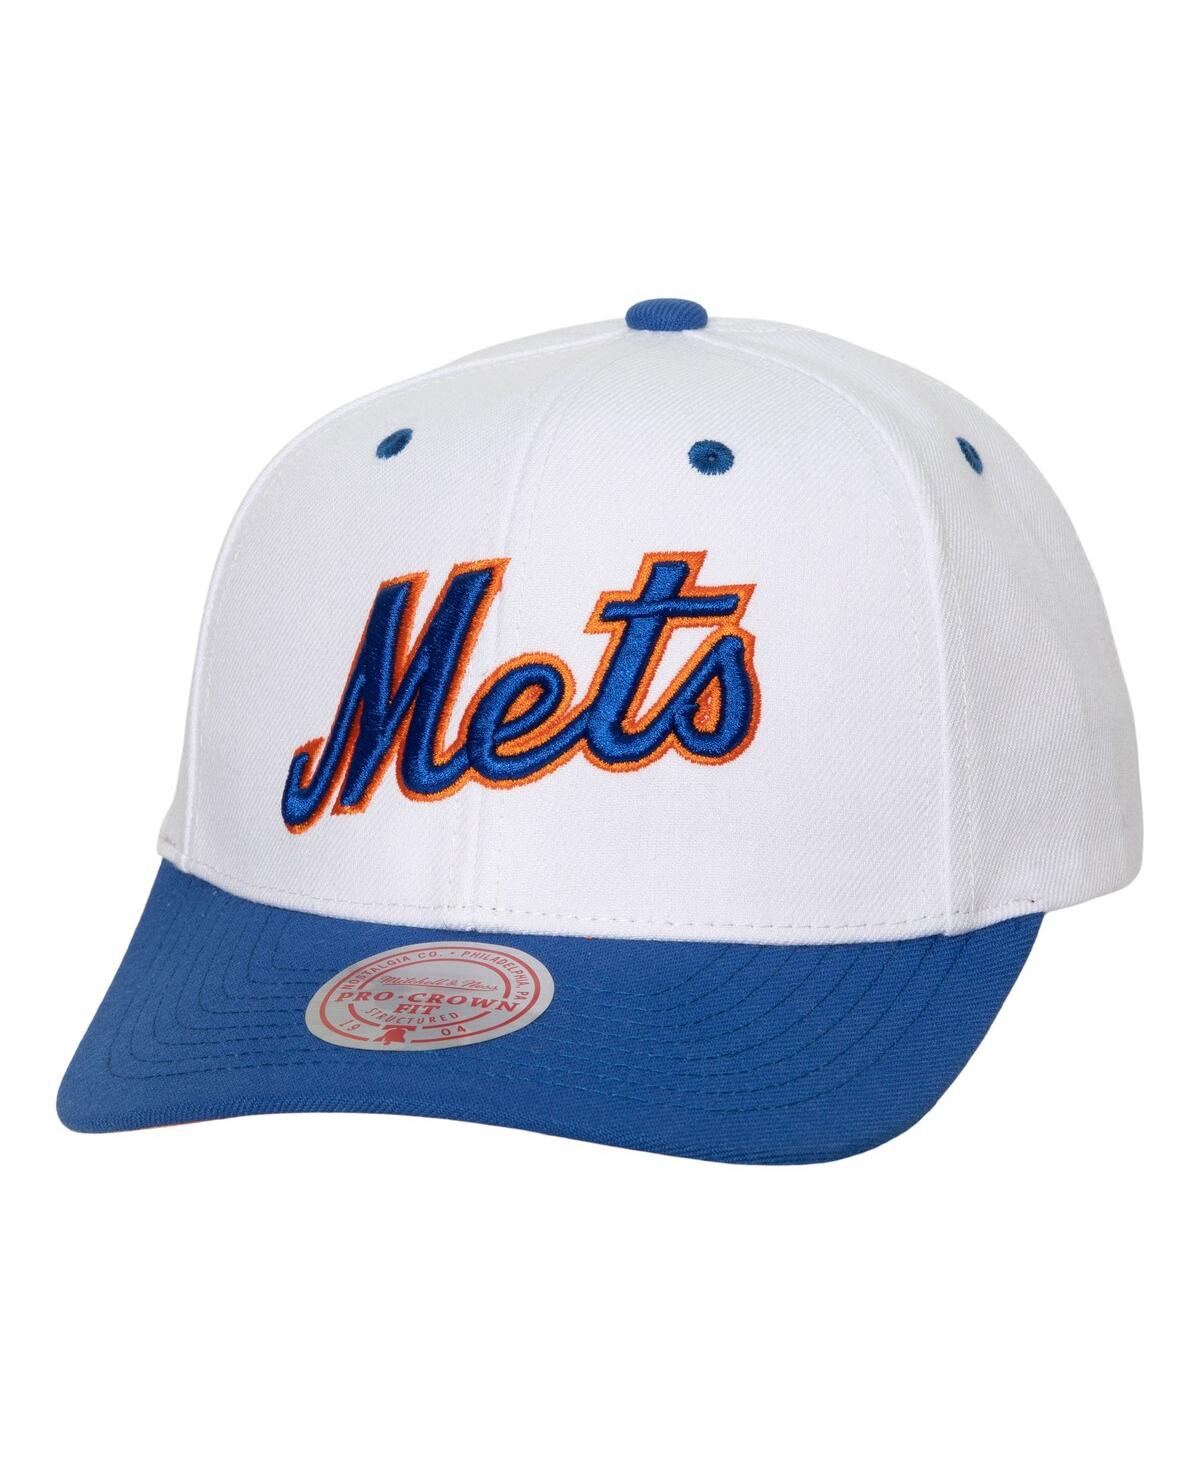 Mitchell & Ness Men's  White New York Mets Cooperstown Collection Pro Crown Snapback Hat